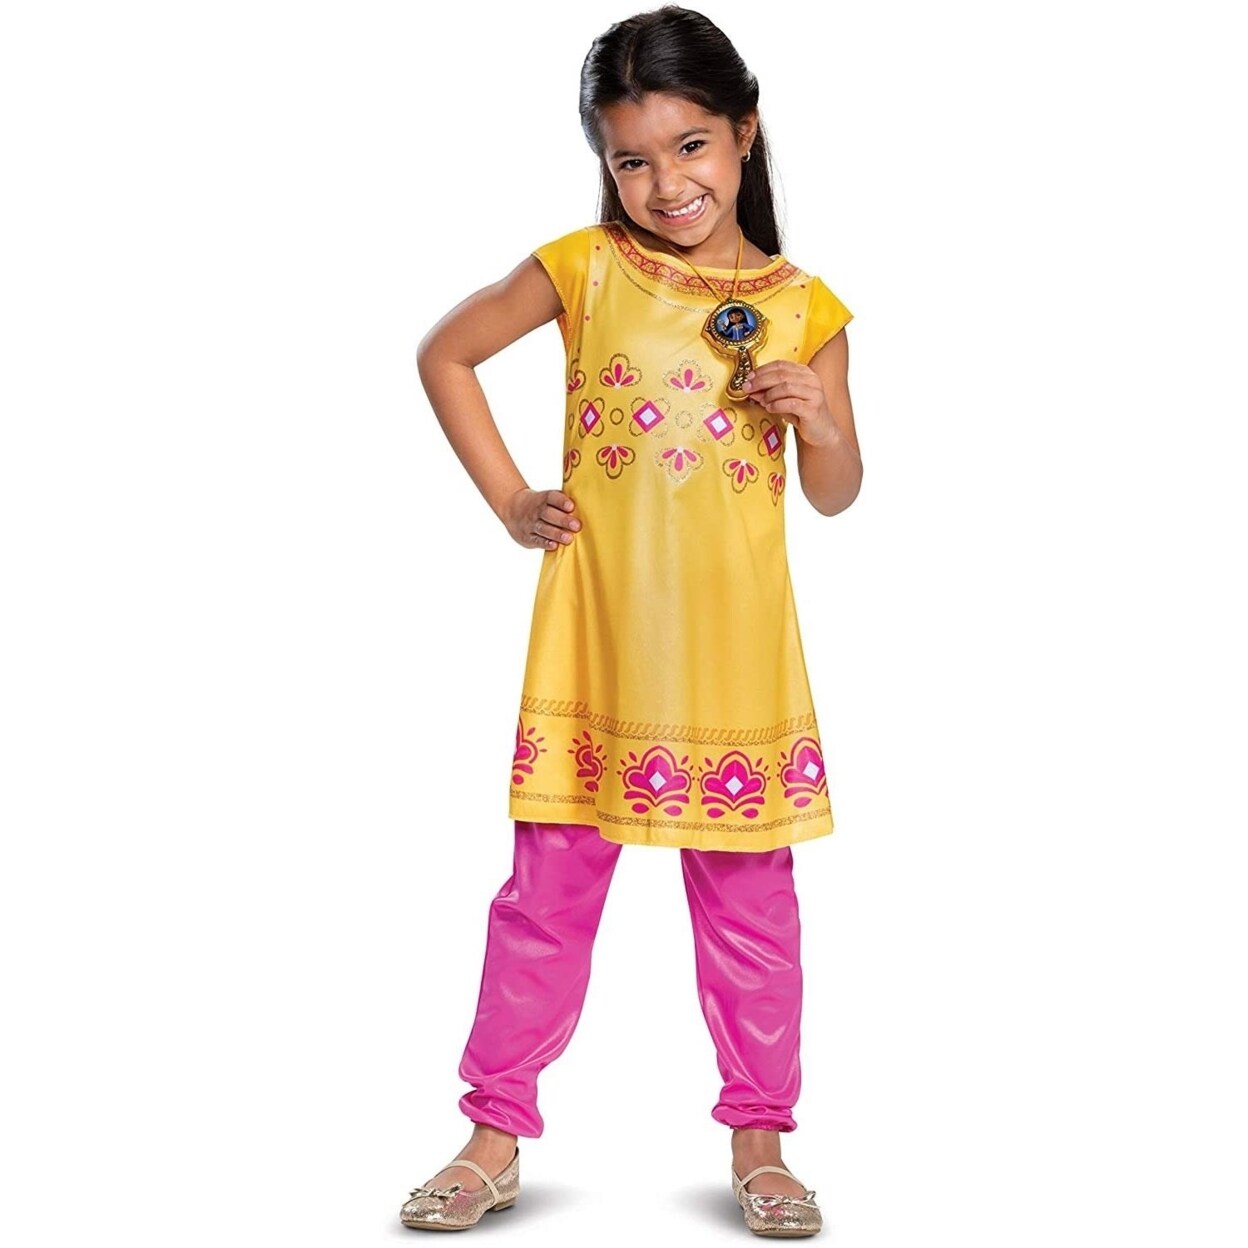 Disguise Mira Royal Detective Classic Girls size S 2T Toddler Disney Costume